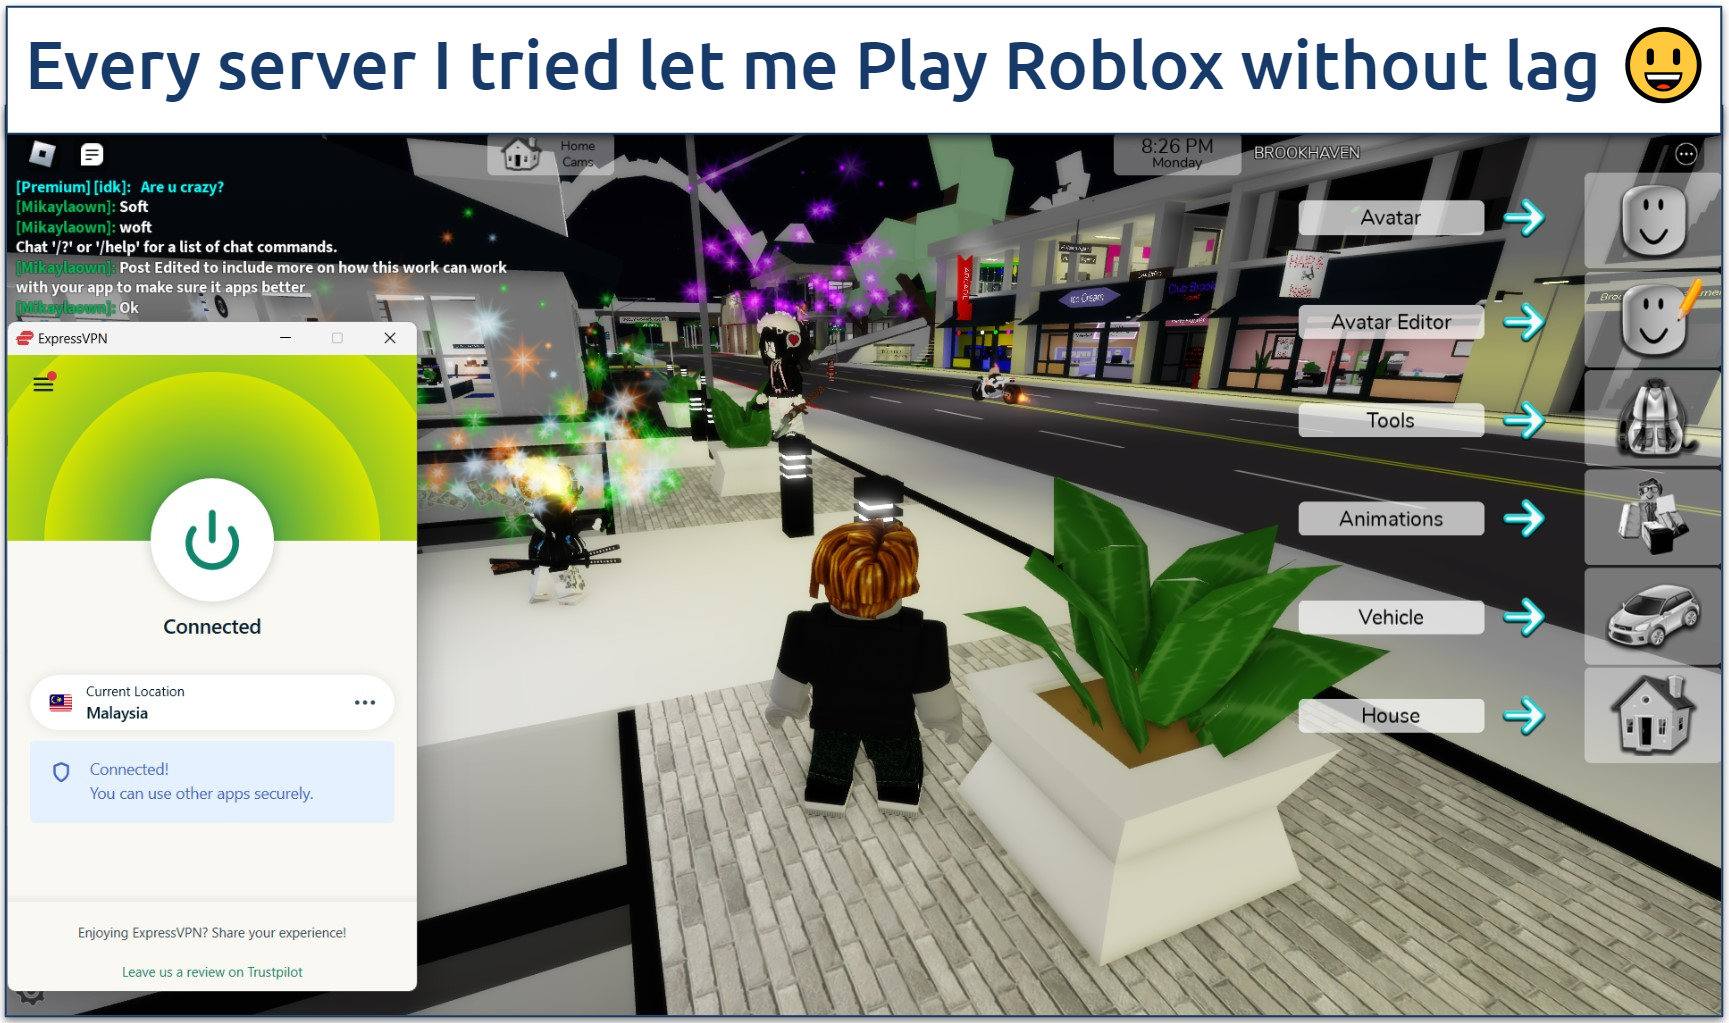 A screenshot of playing Brookhaven on Roblox while connected to ExpressVPN.